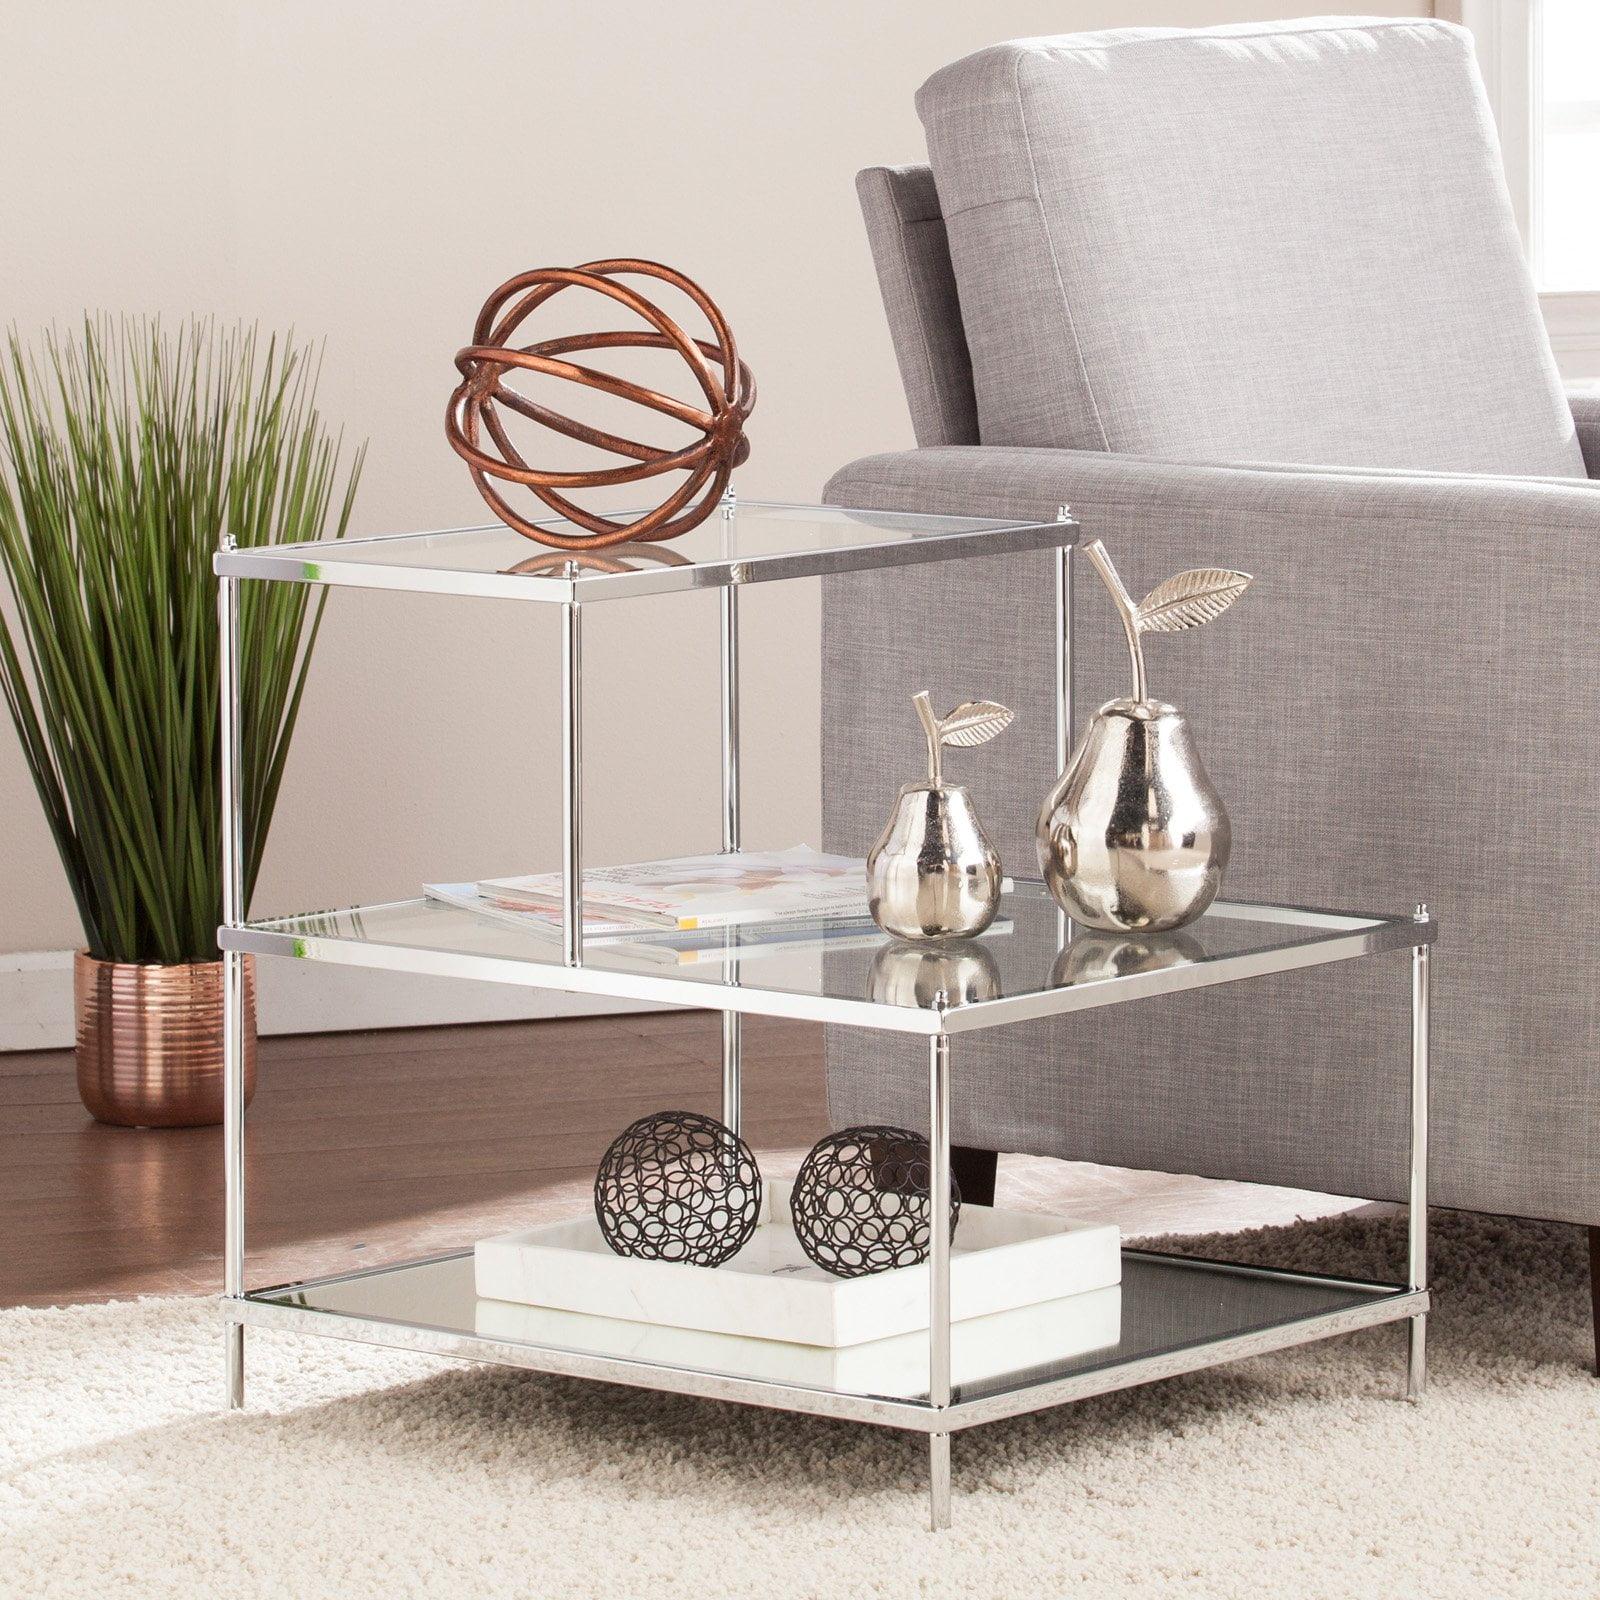 Chic Knox Glam Mirrored & Chrome-Plated Metal Accent Table